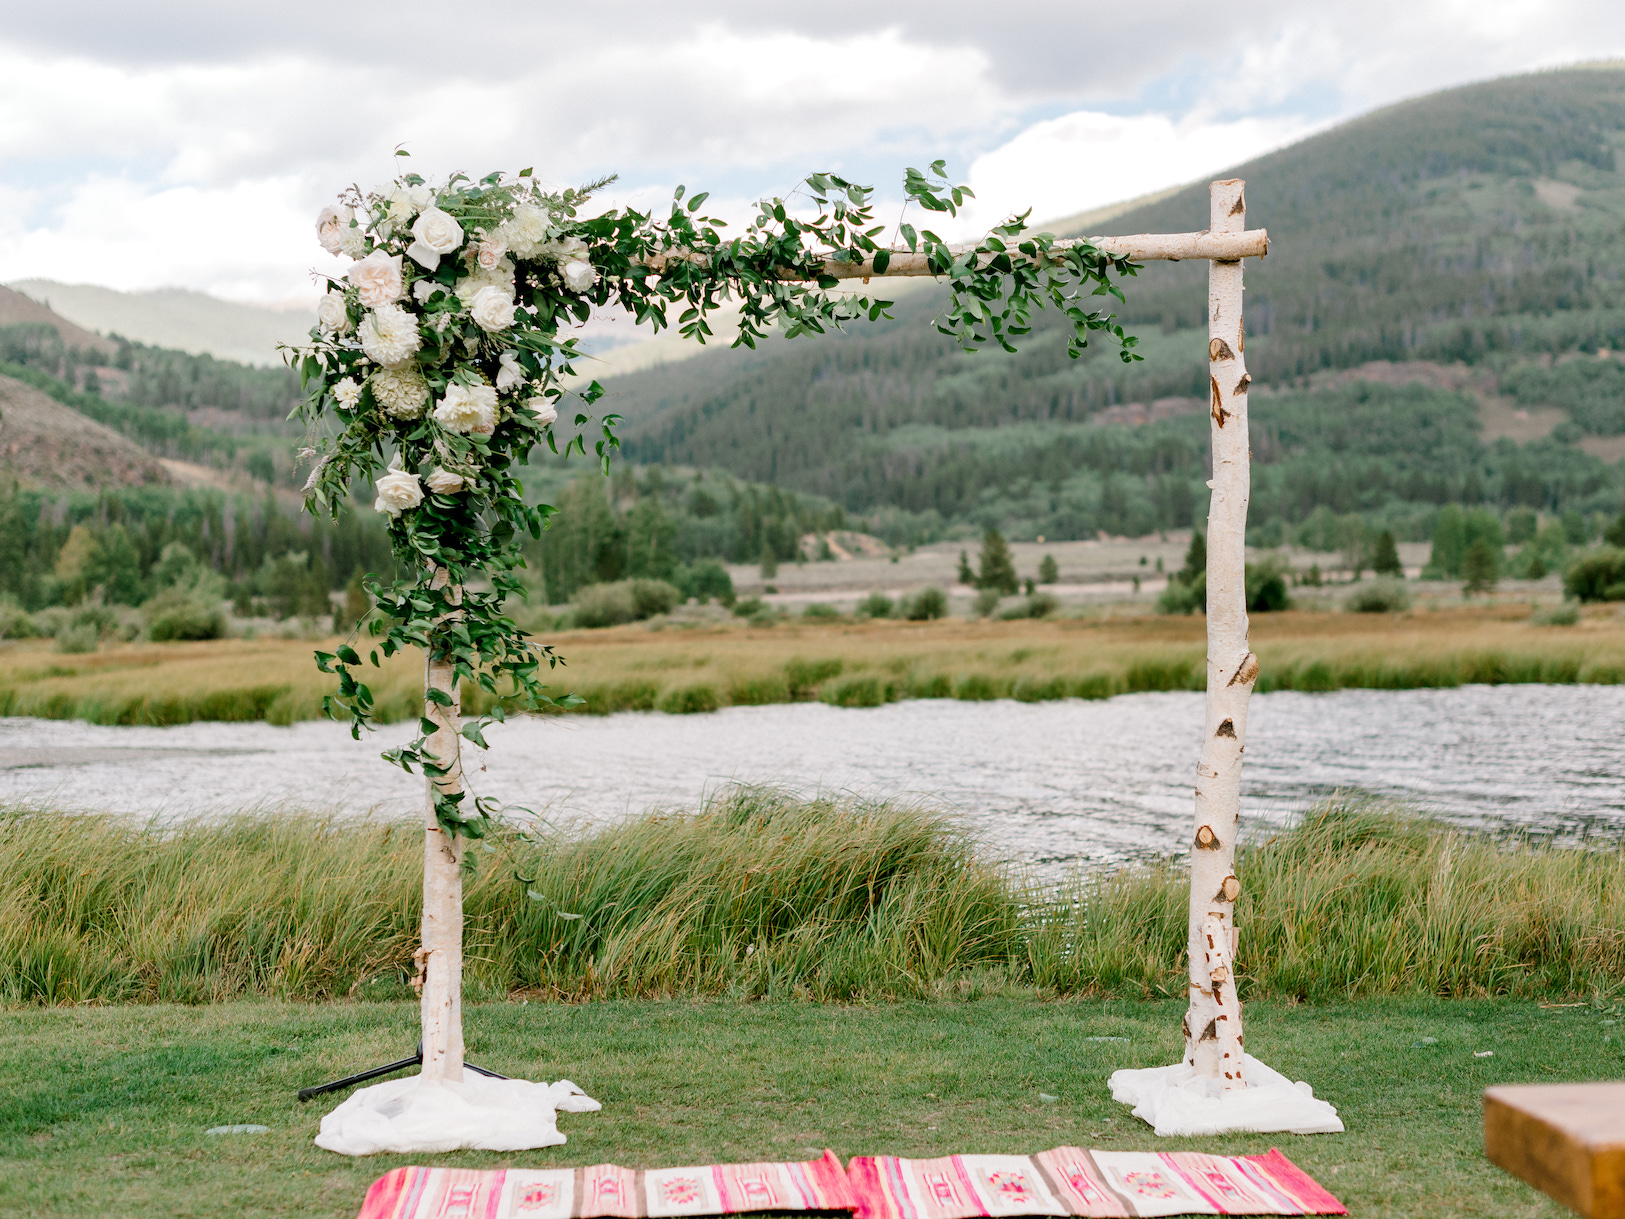 A Romantic Summer wedding at Camp Hale in Colorado with Southwestern touches by The Styled Soiree and Sara Lynn Photographic